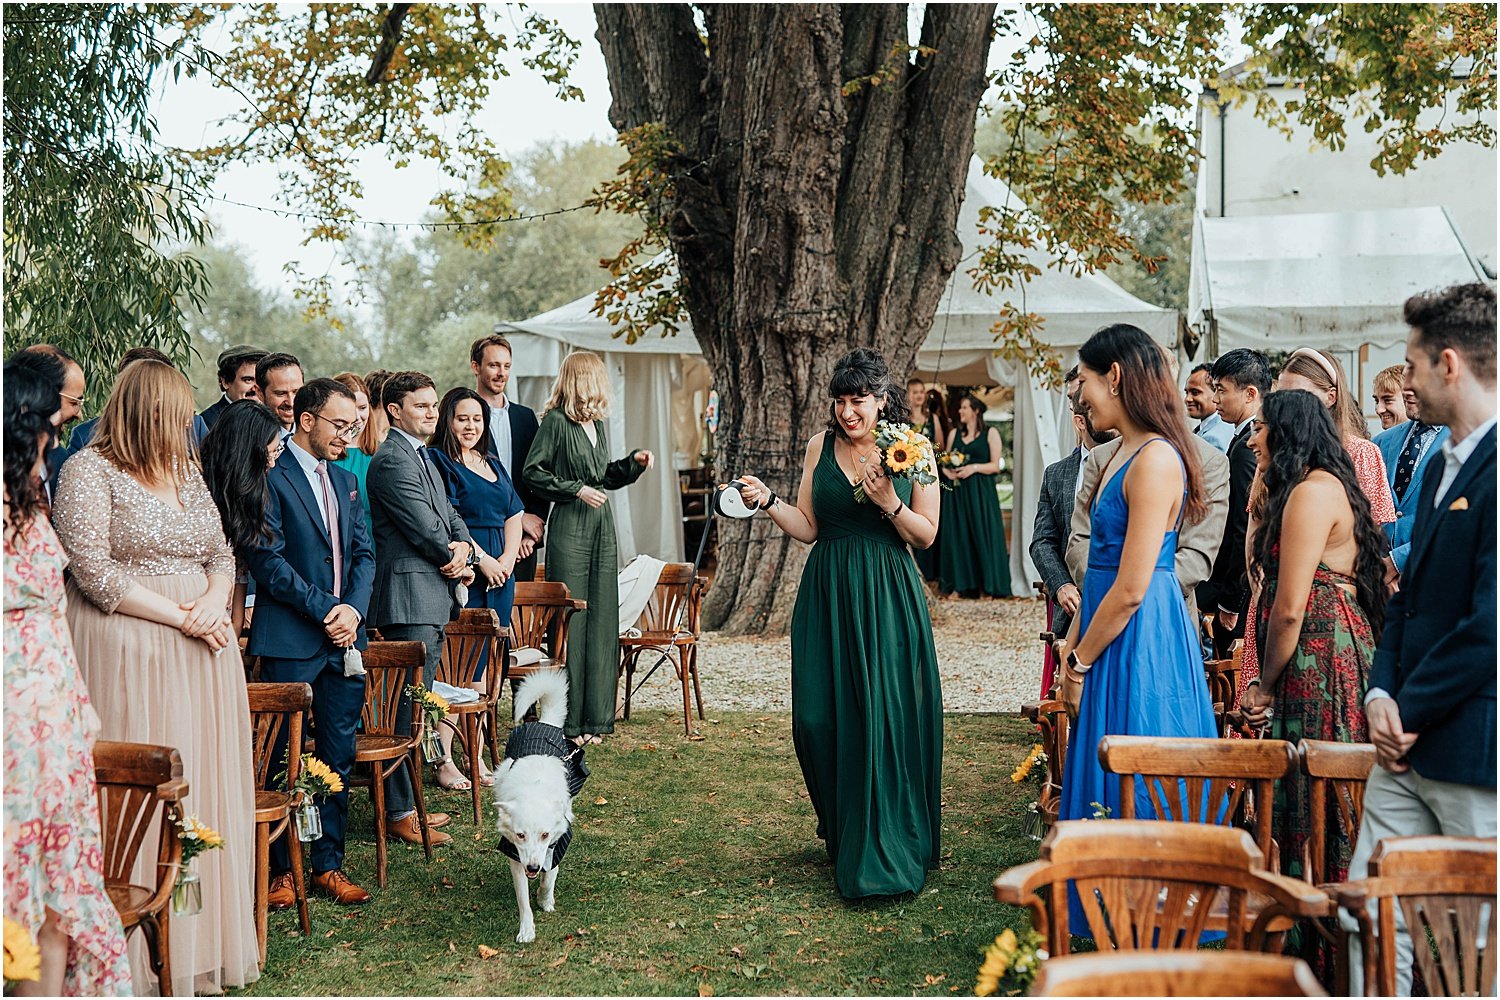 Bridesmaid with dog walking down the aisle